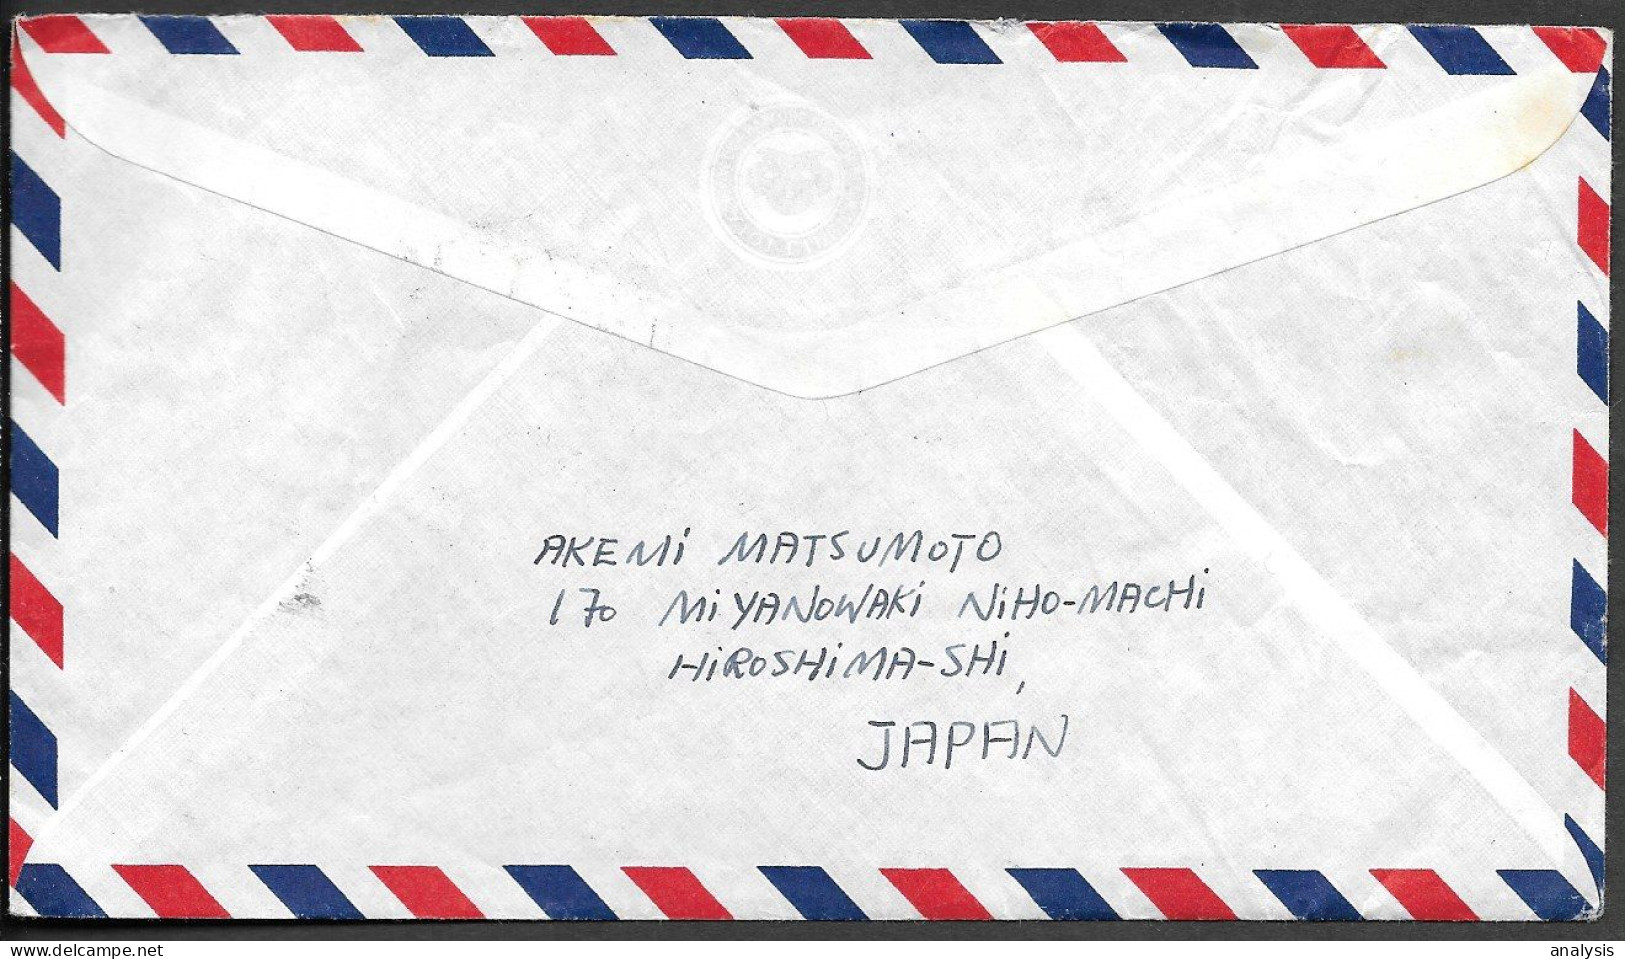 Japan Hiroshima Cover Mailed To Austria 1960. 115Y Rate Multiple Stamps Gold Fish Rainbow - Storia Postale